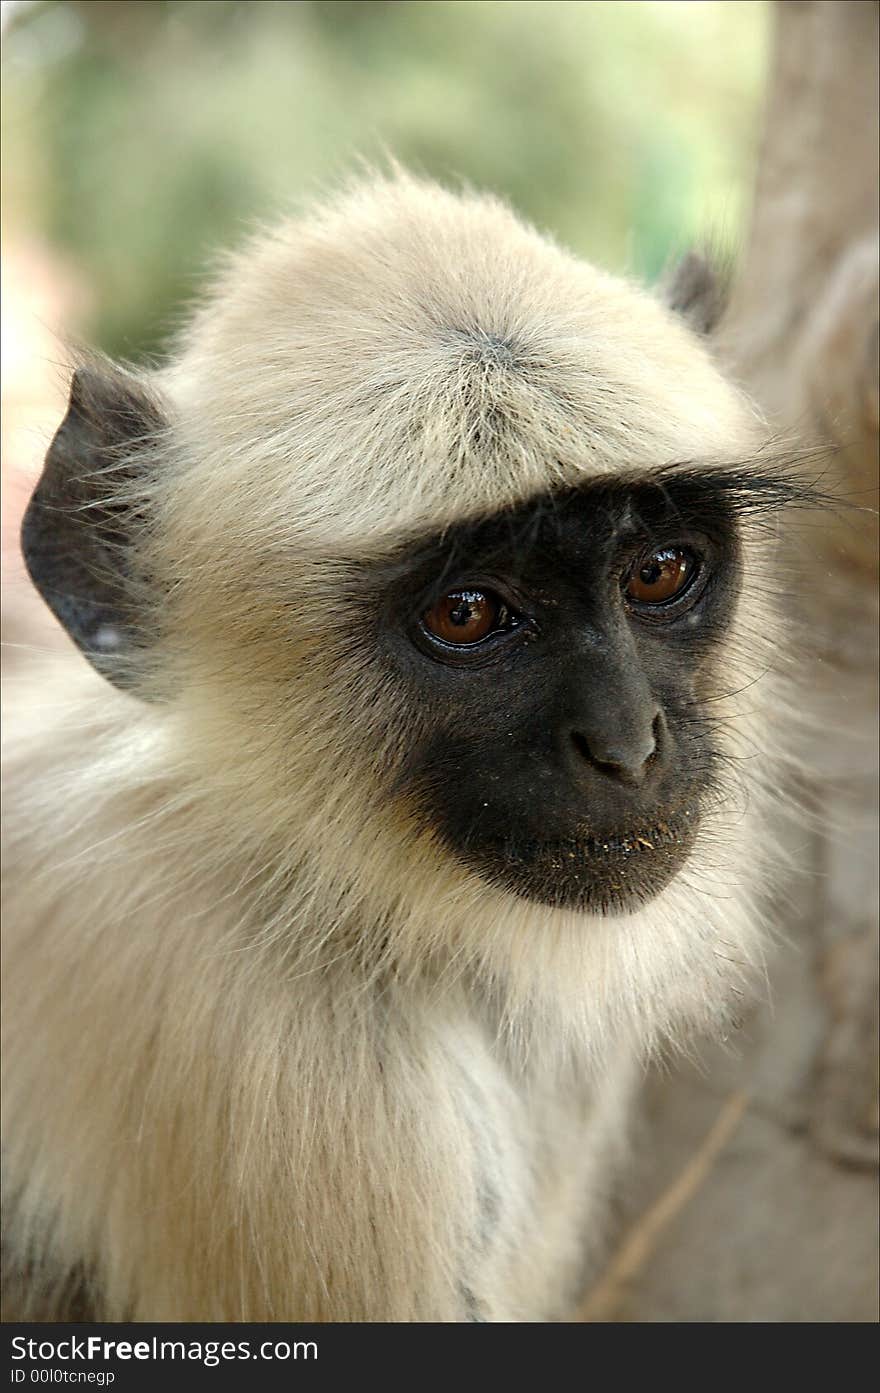 A young Indian monkey staring and ready for action